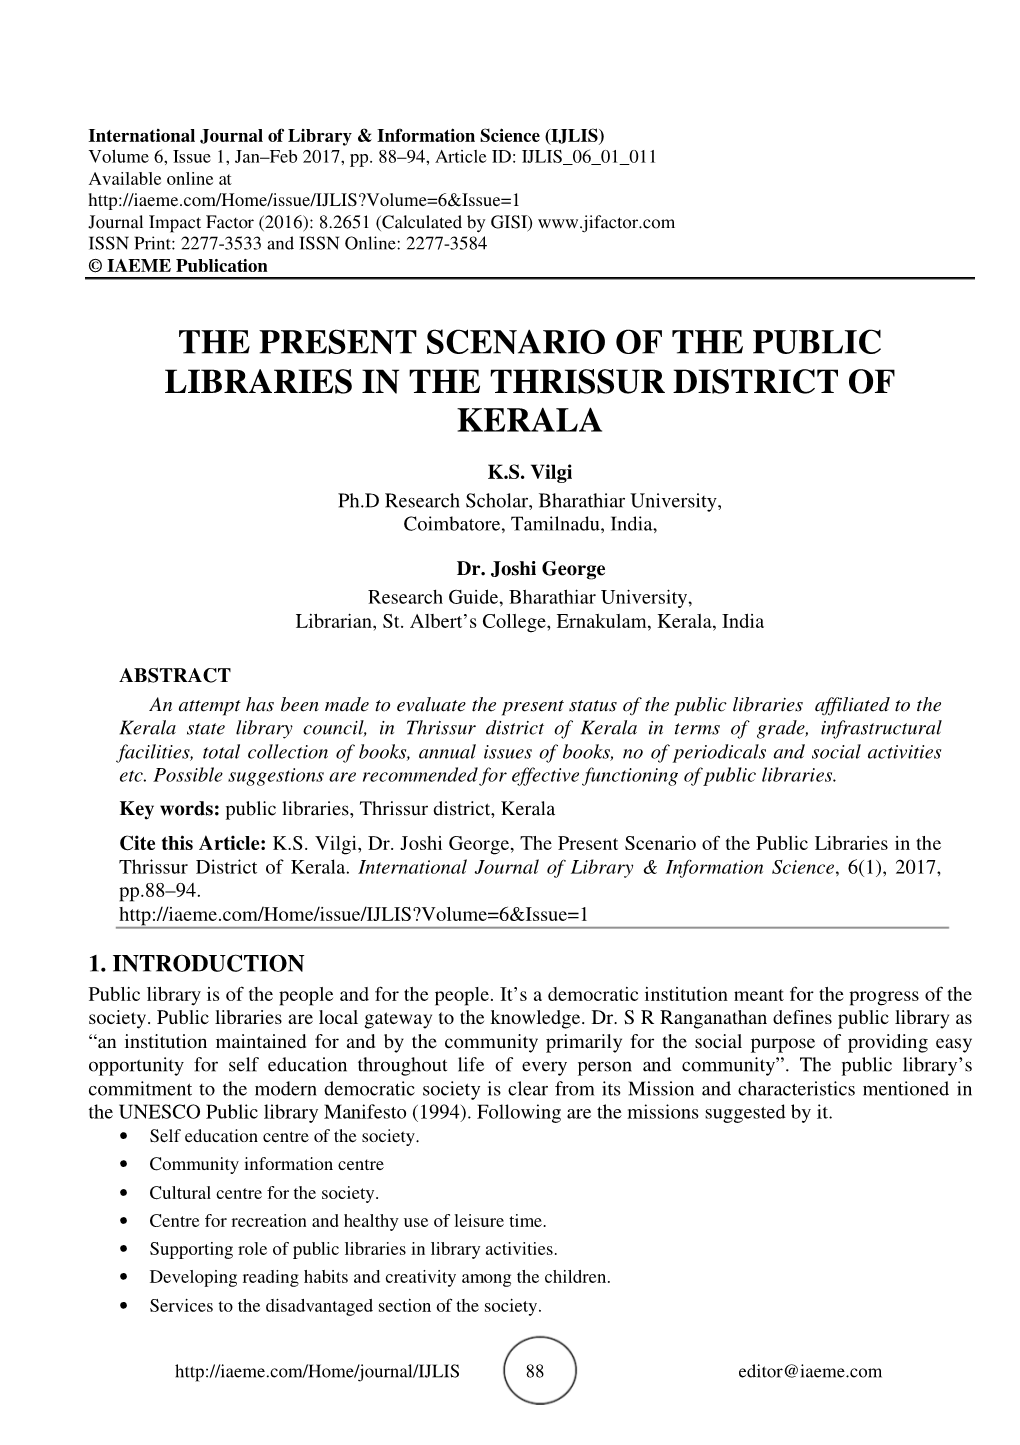 The Present Scenario of the Public Libraries in the Thrissur District of Kerala